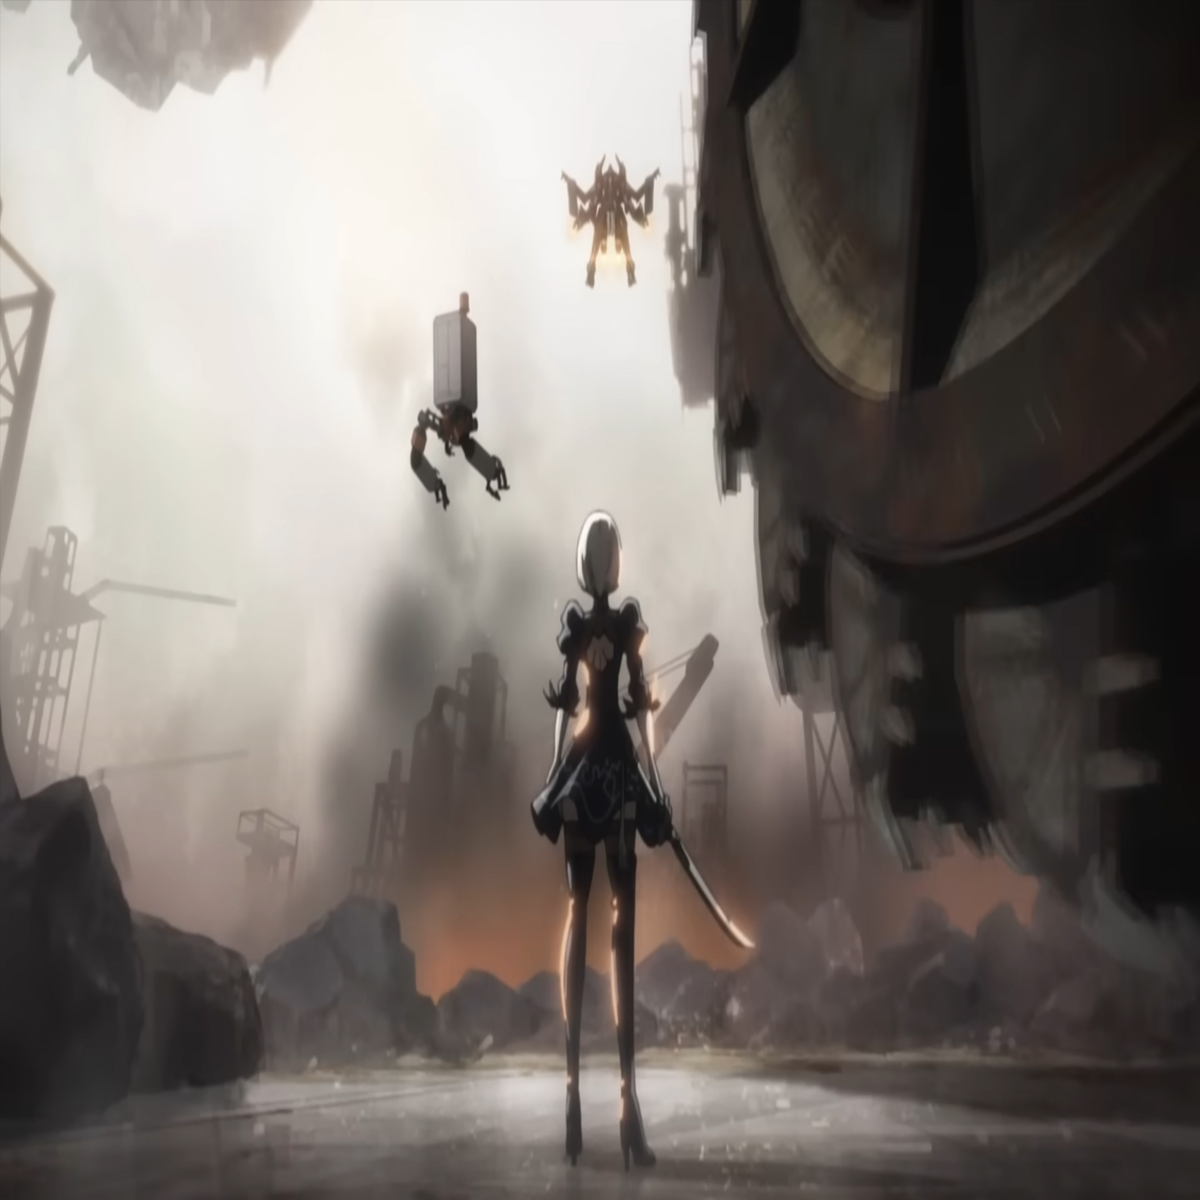 NieR: Automata Anime Episodes Guide - Release Dates, Times & More